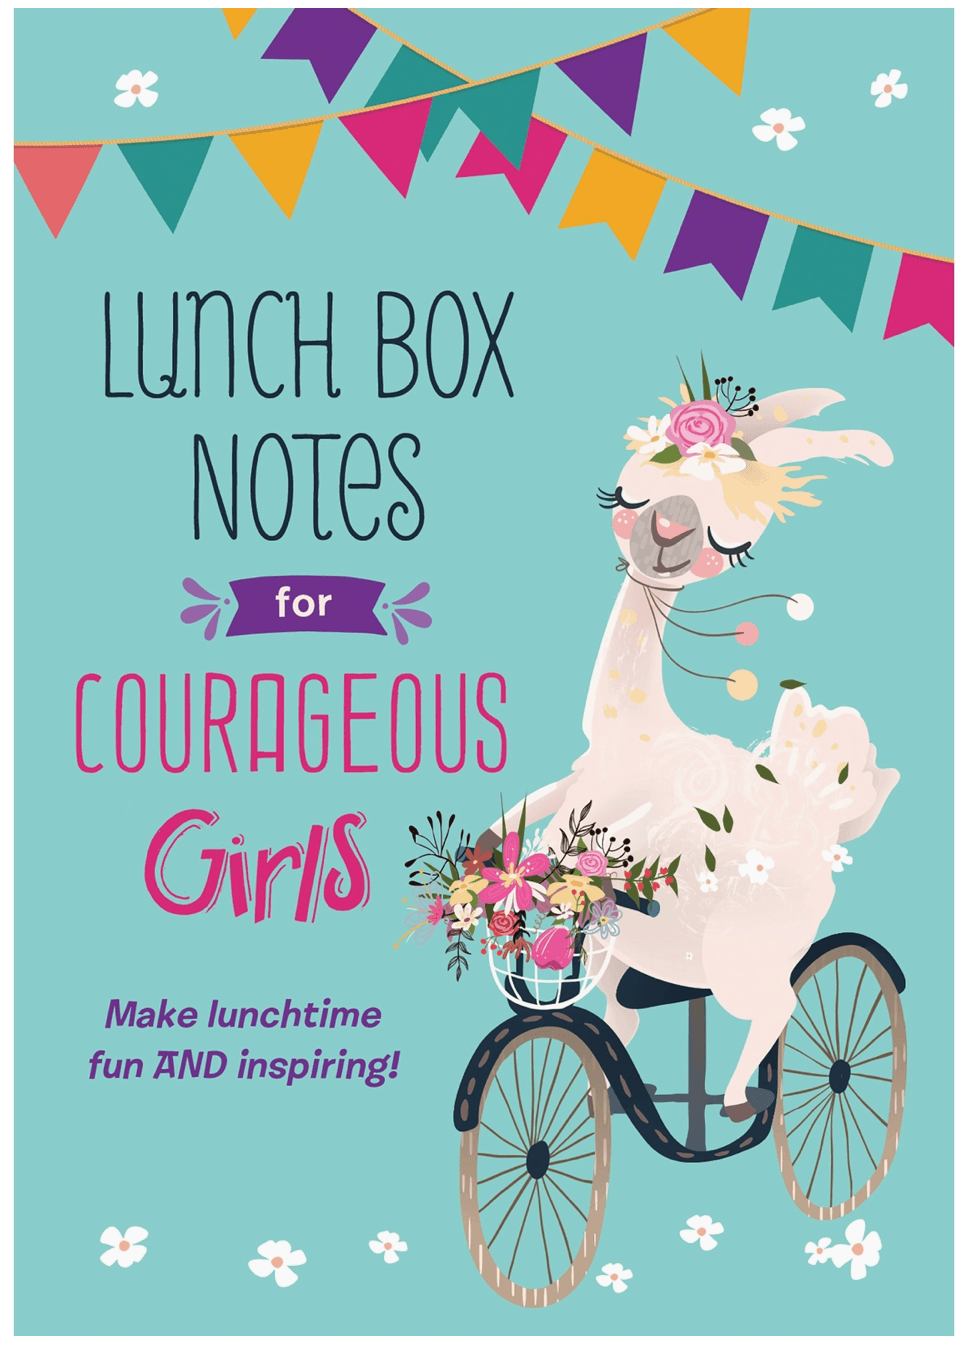 Lunch Box Notes for Courageous Girls